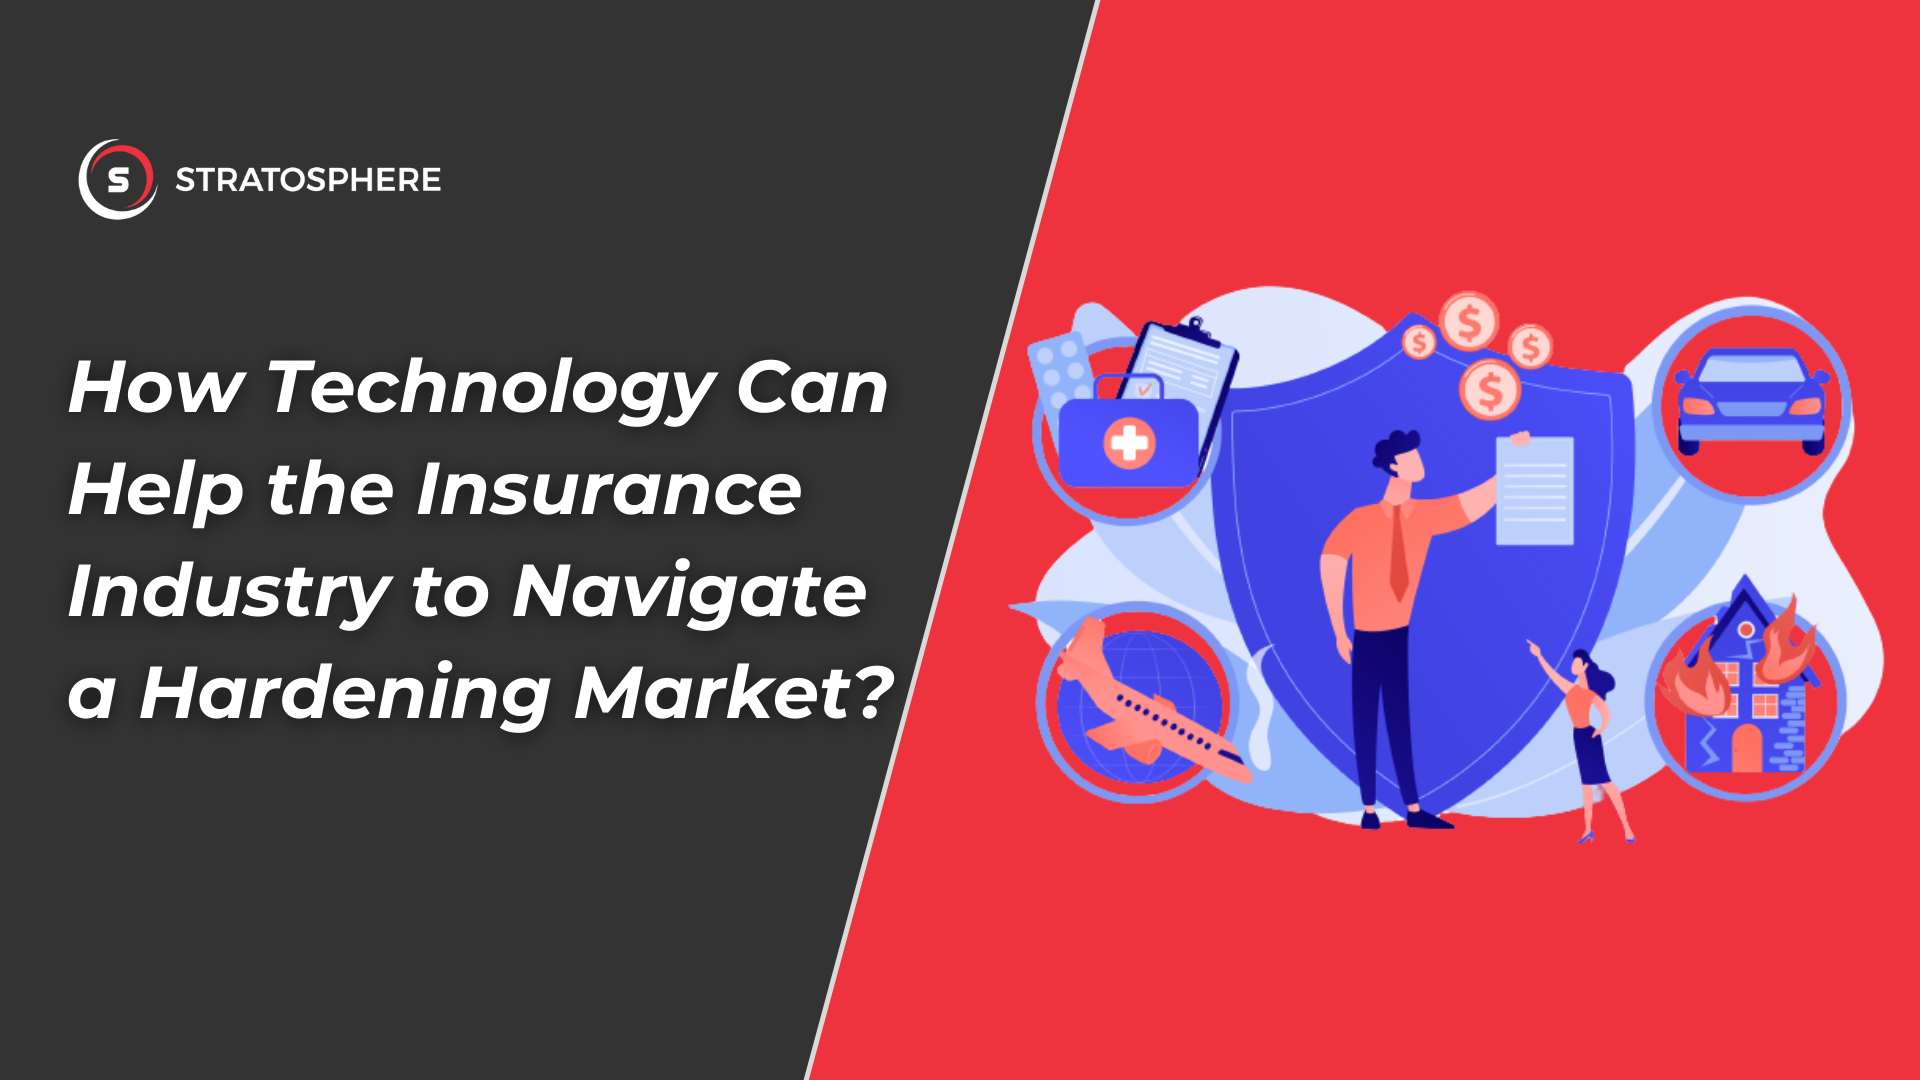 How Technology Can Help the Insurance Industry to Navigate a Hardening Market?